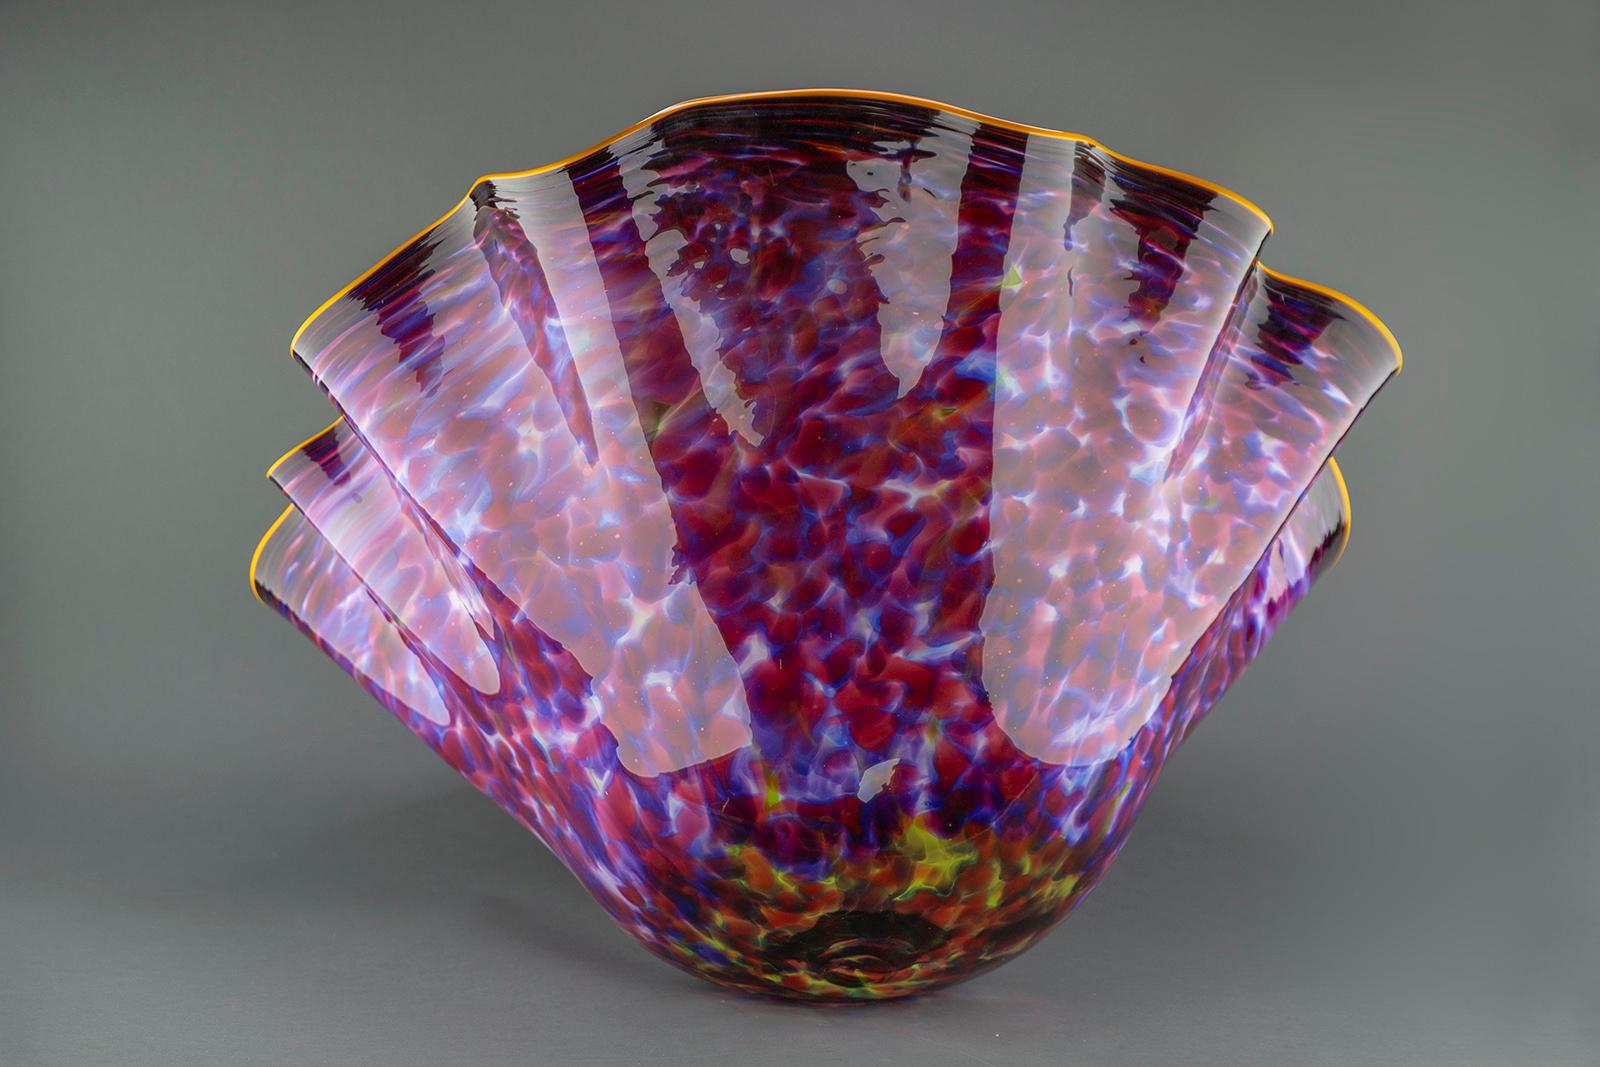 Artist: Dale Chihuly
Medium: Hand Blown Glass
Size: 26